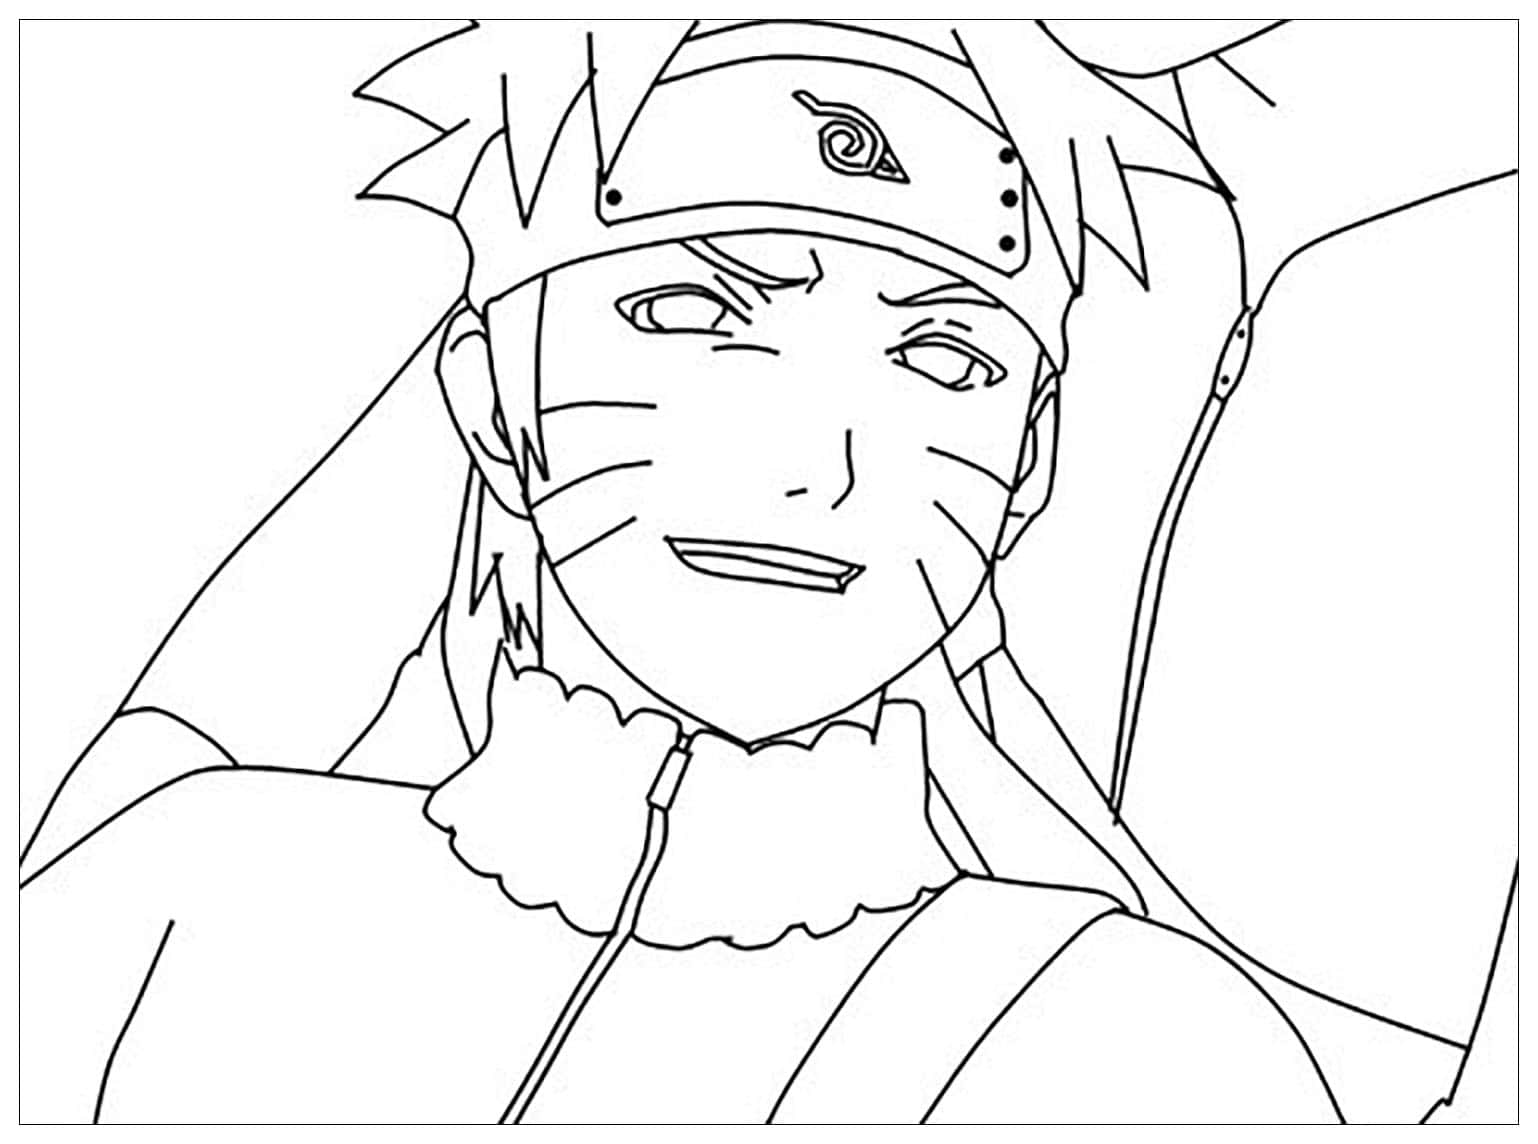 Naruto color page - Fun coloring pages for kids to print